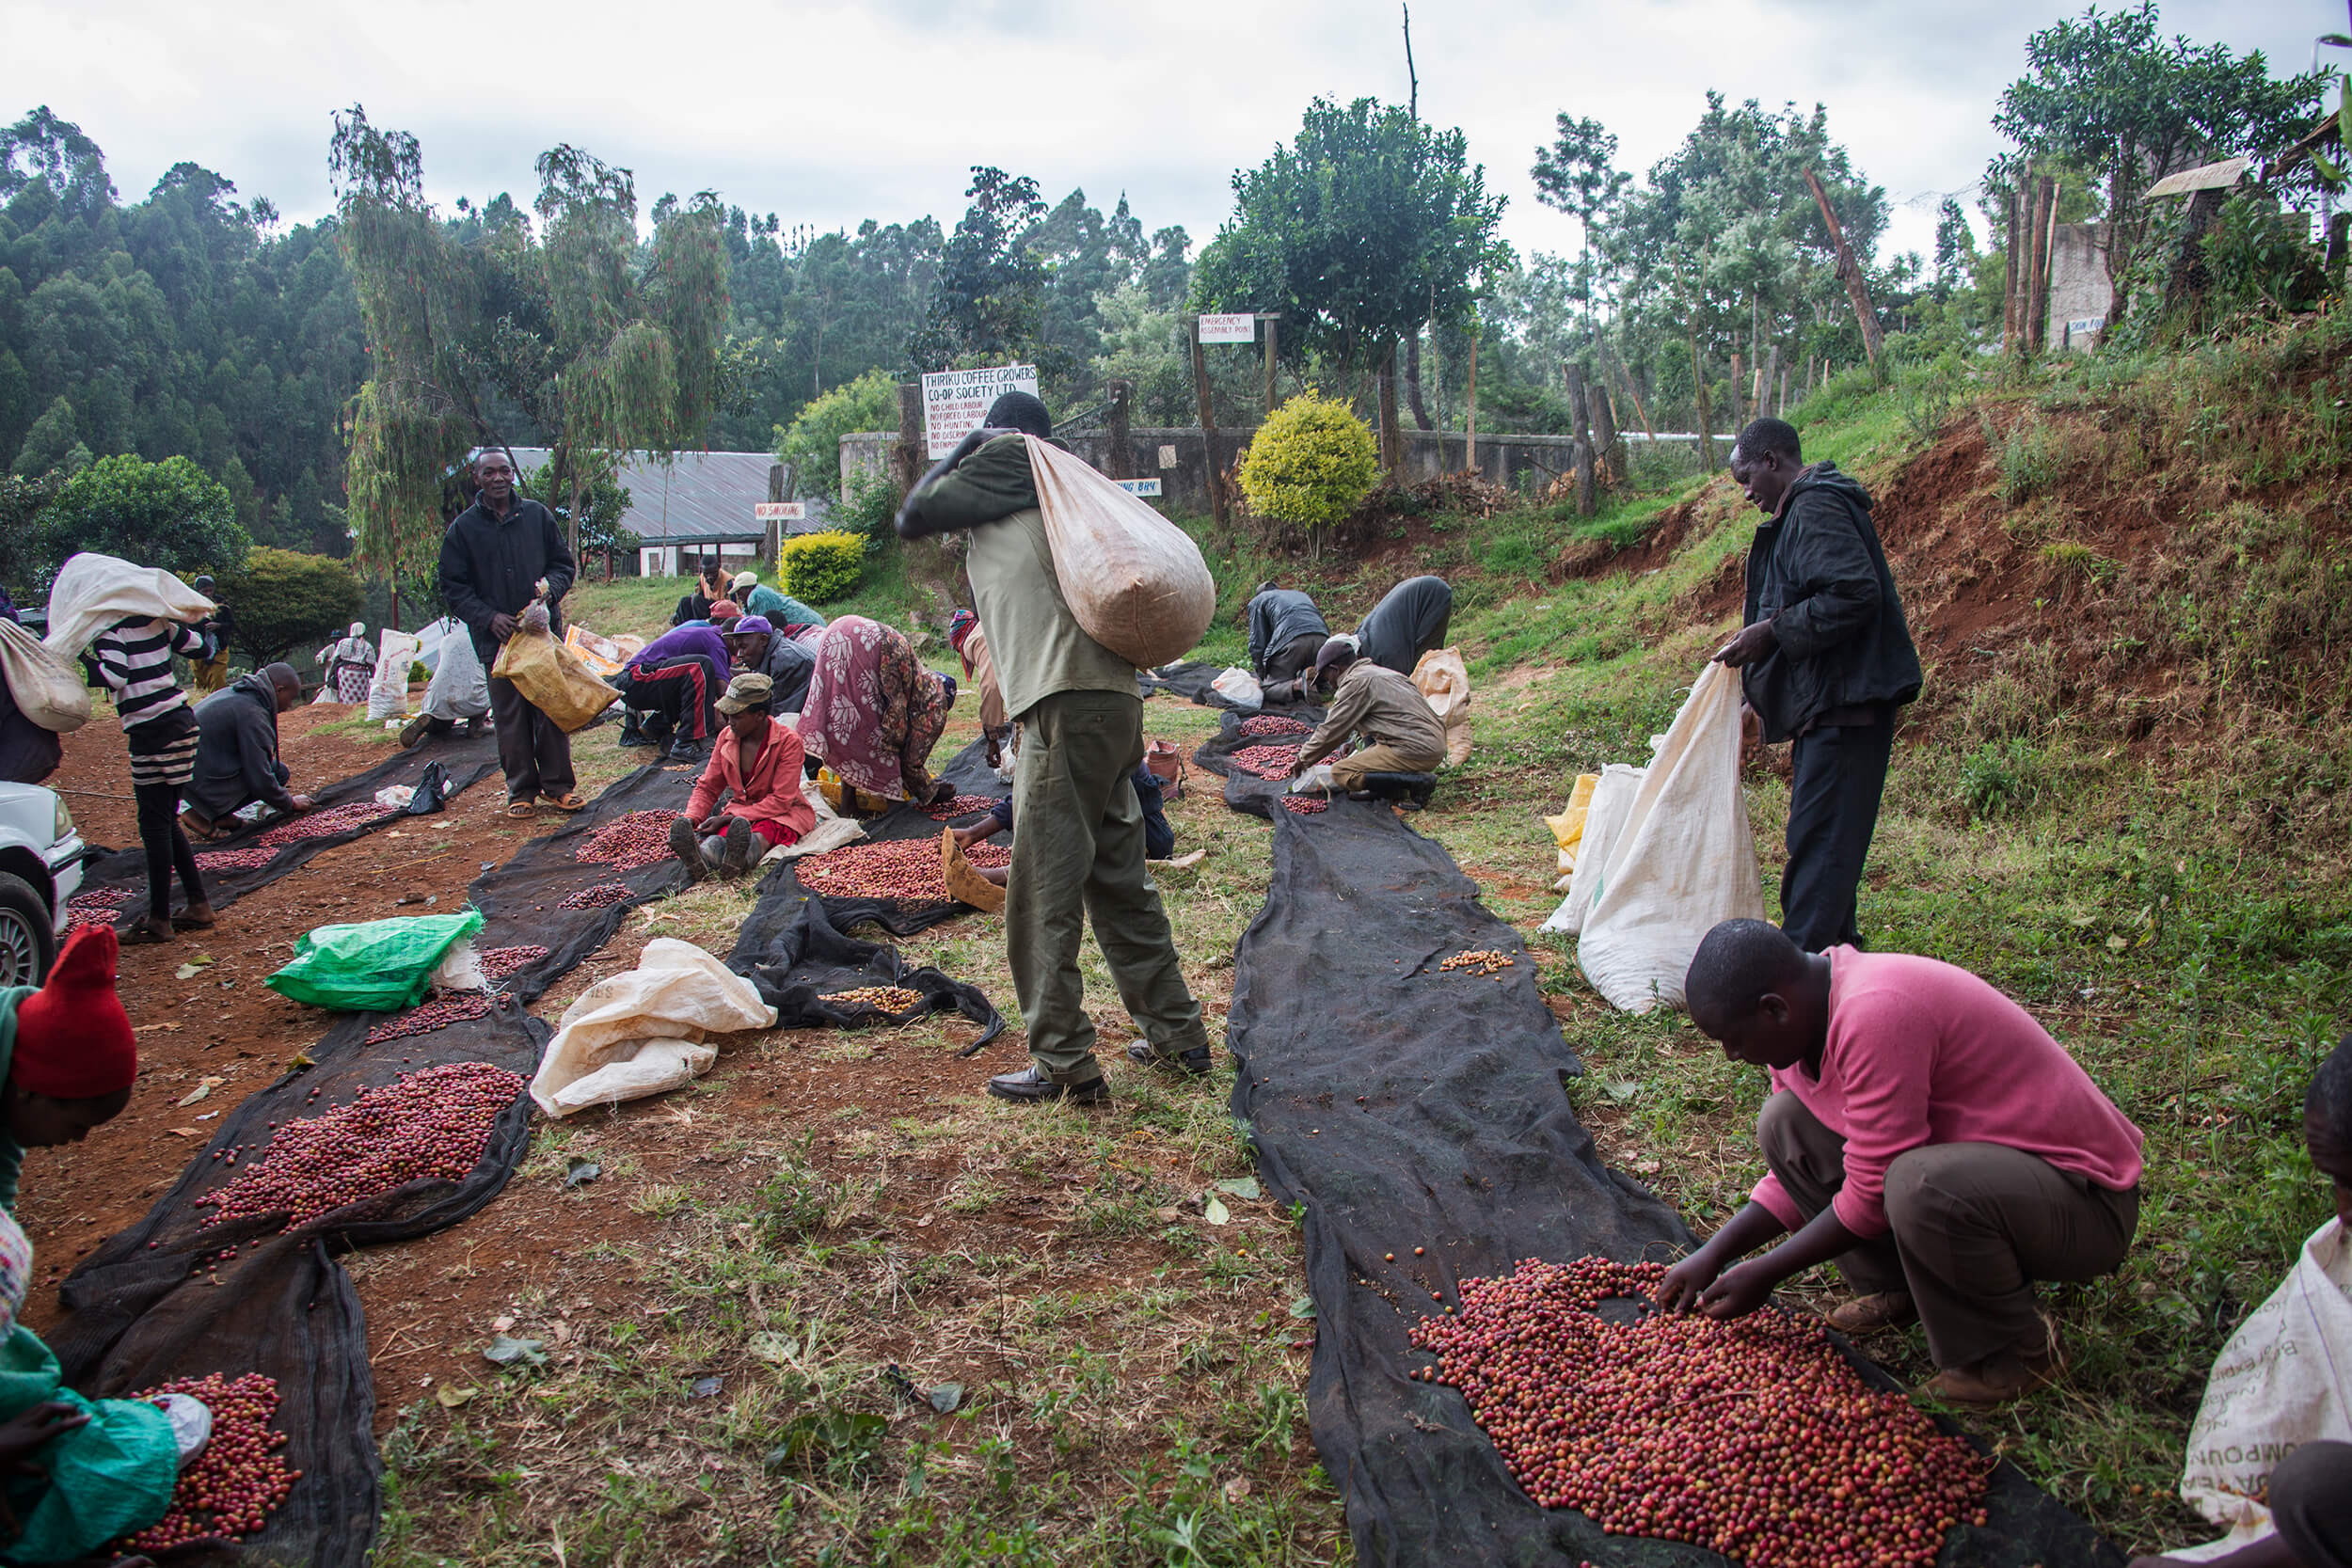  Coffee farmers with small farms, weigh their coffee harvest before selling to the cooperative. 